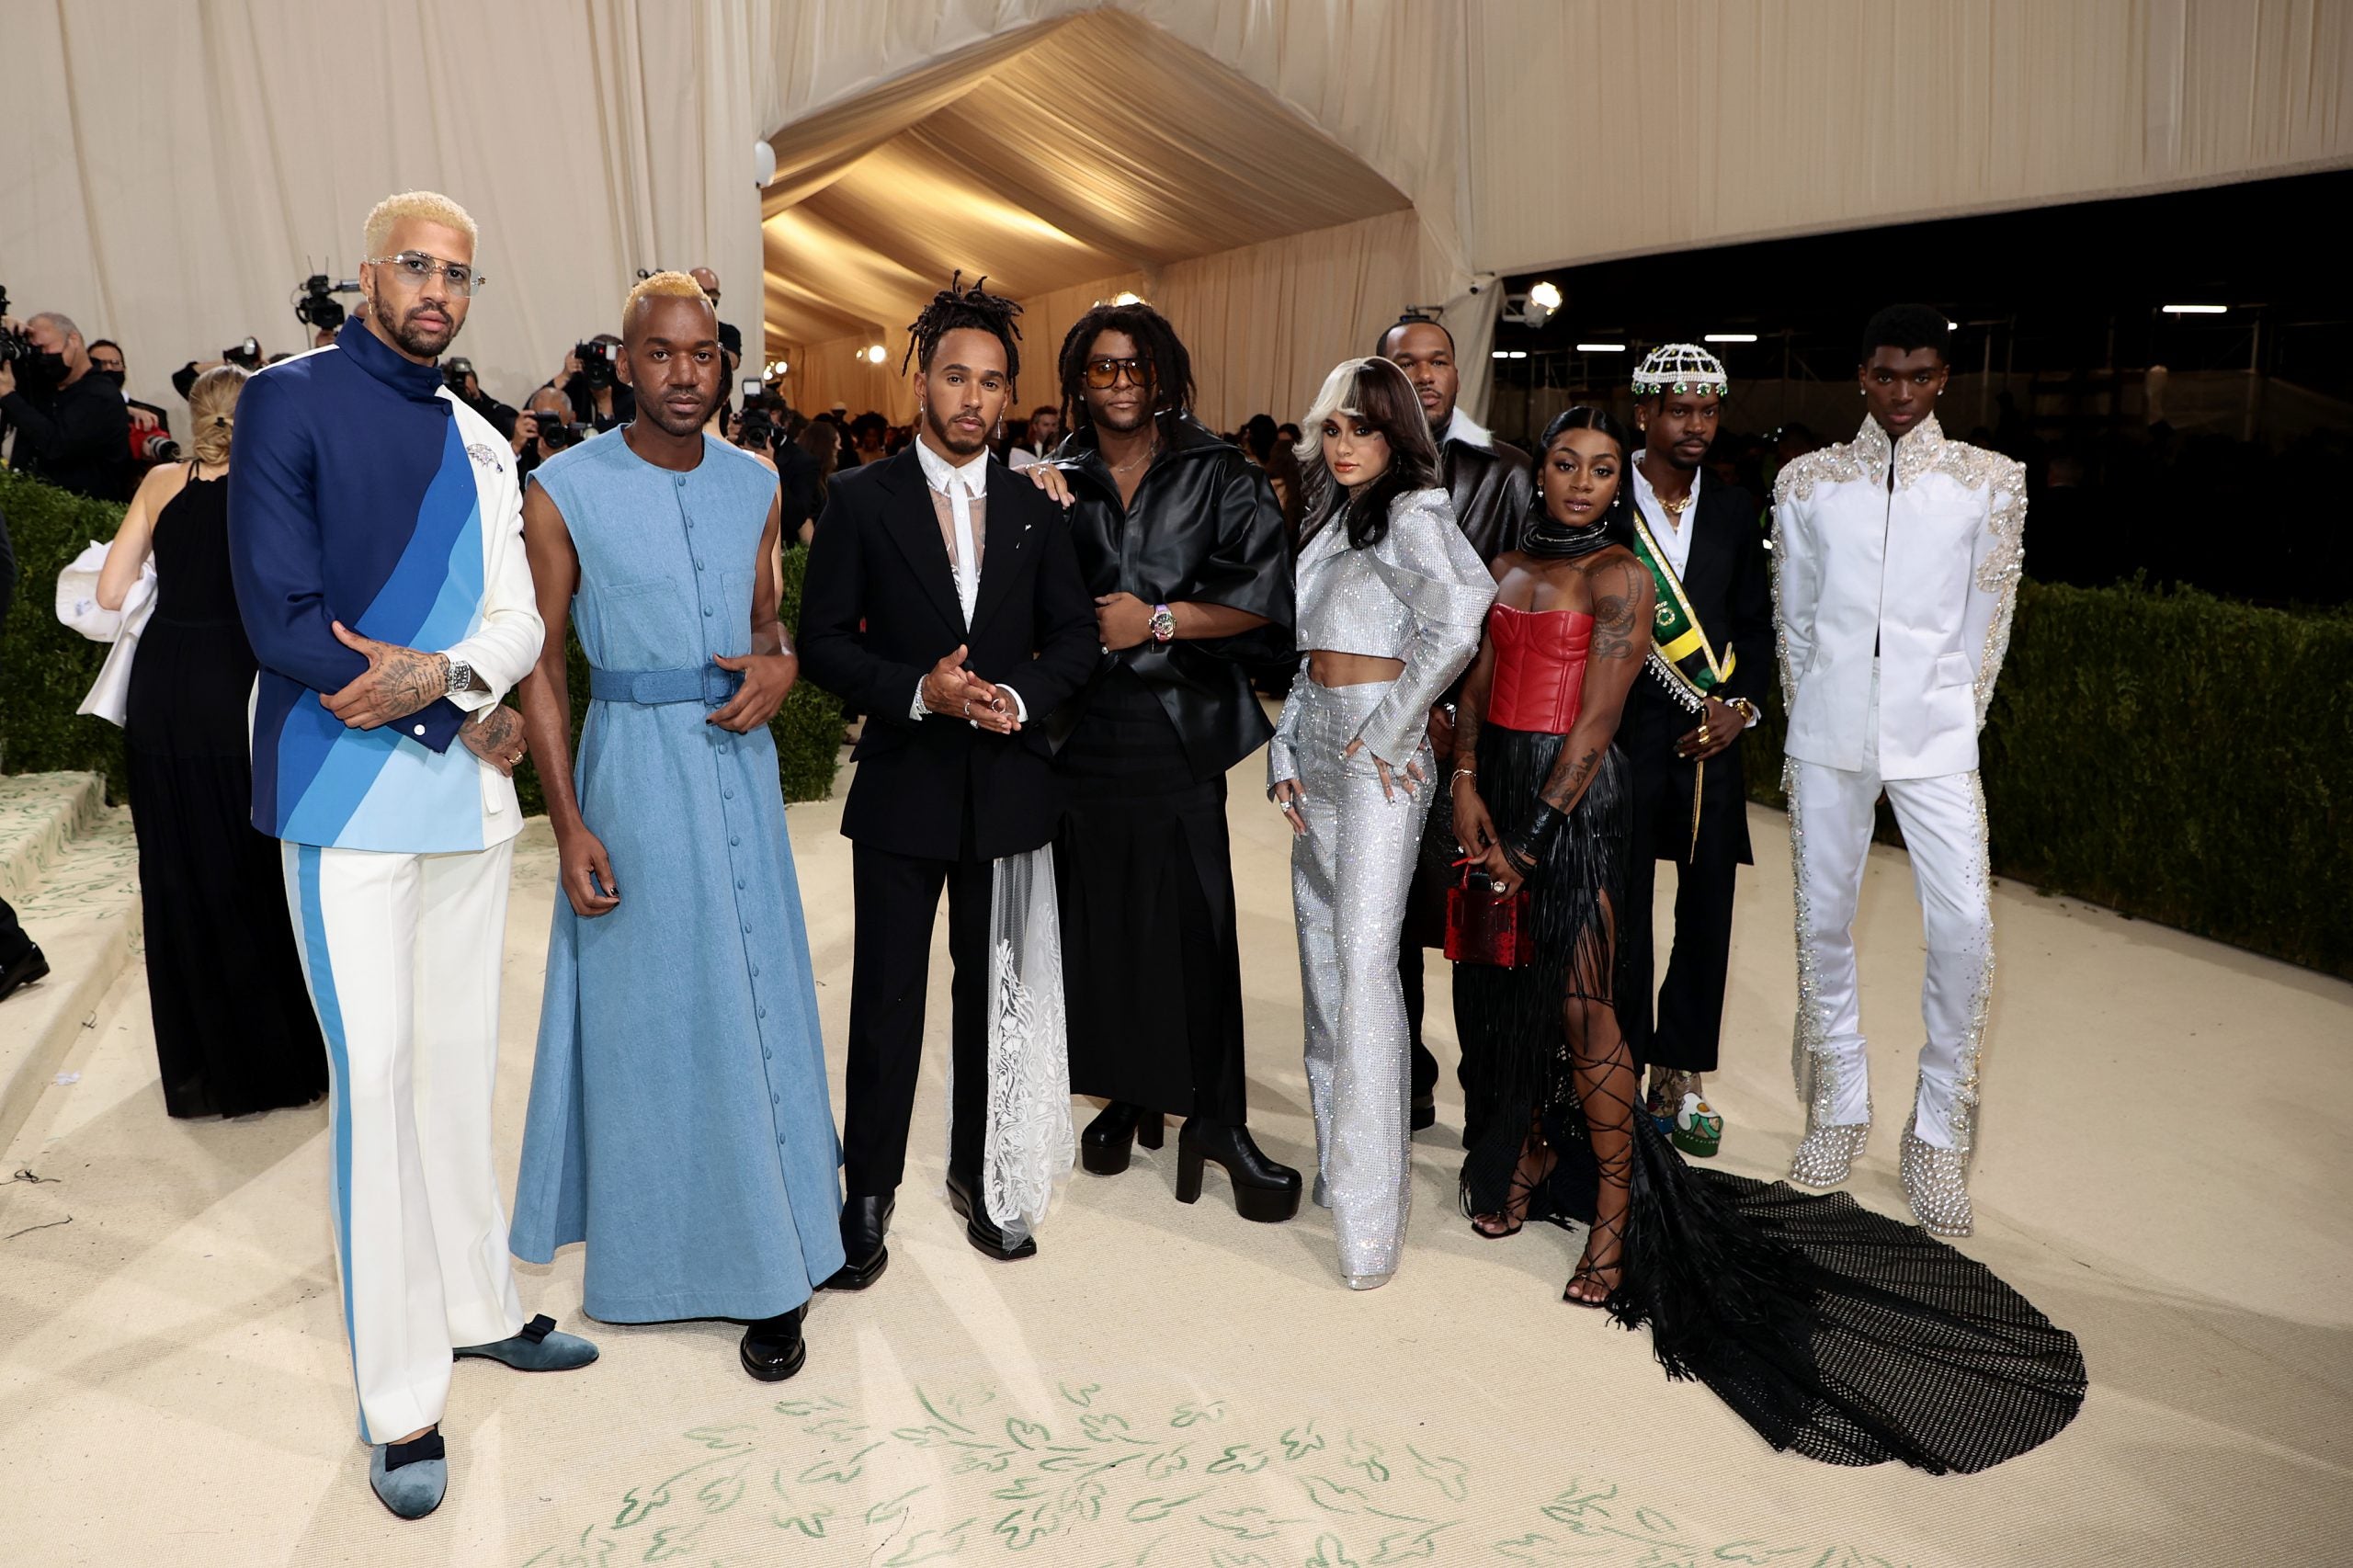 The Black Designers Nominated For The 2021 CFDA Fashion Awards